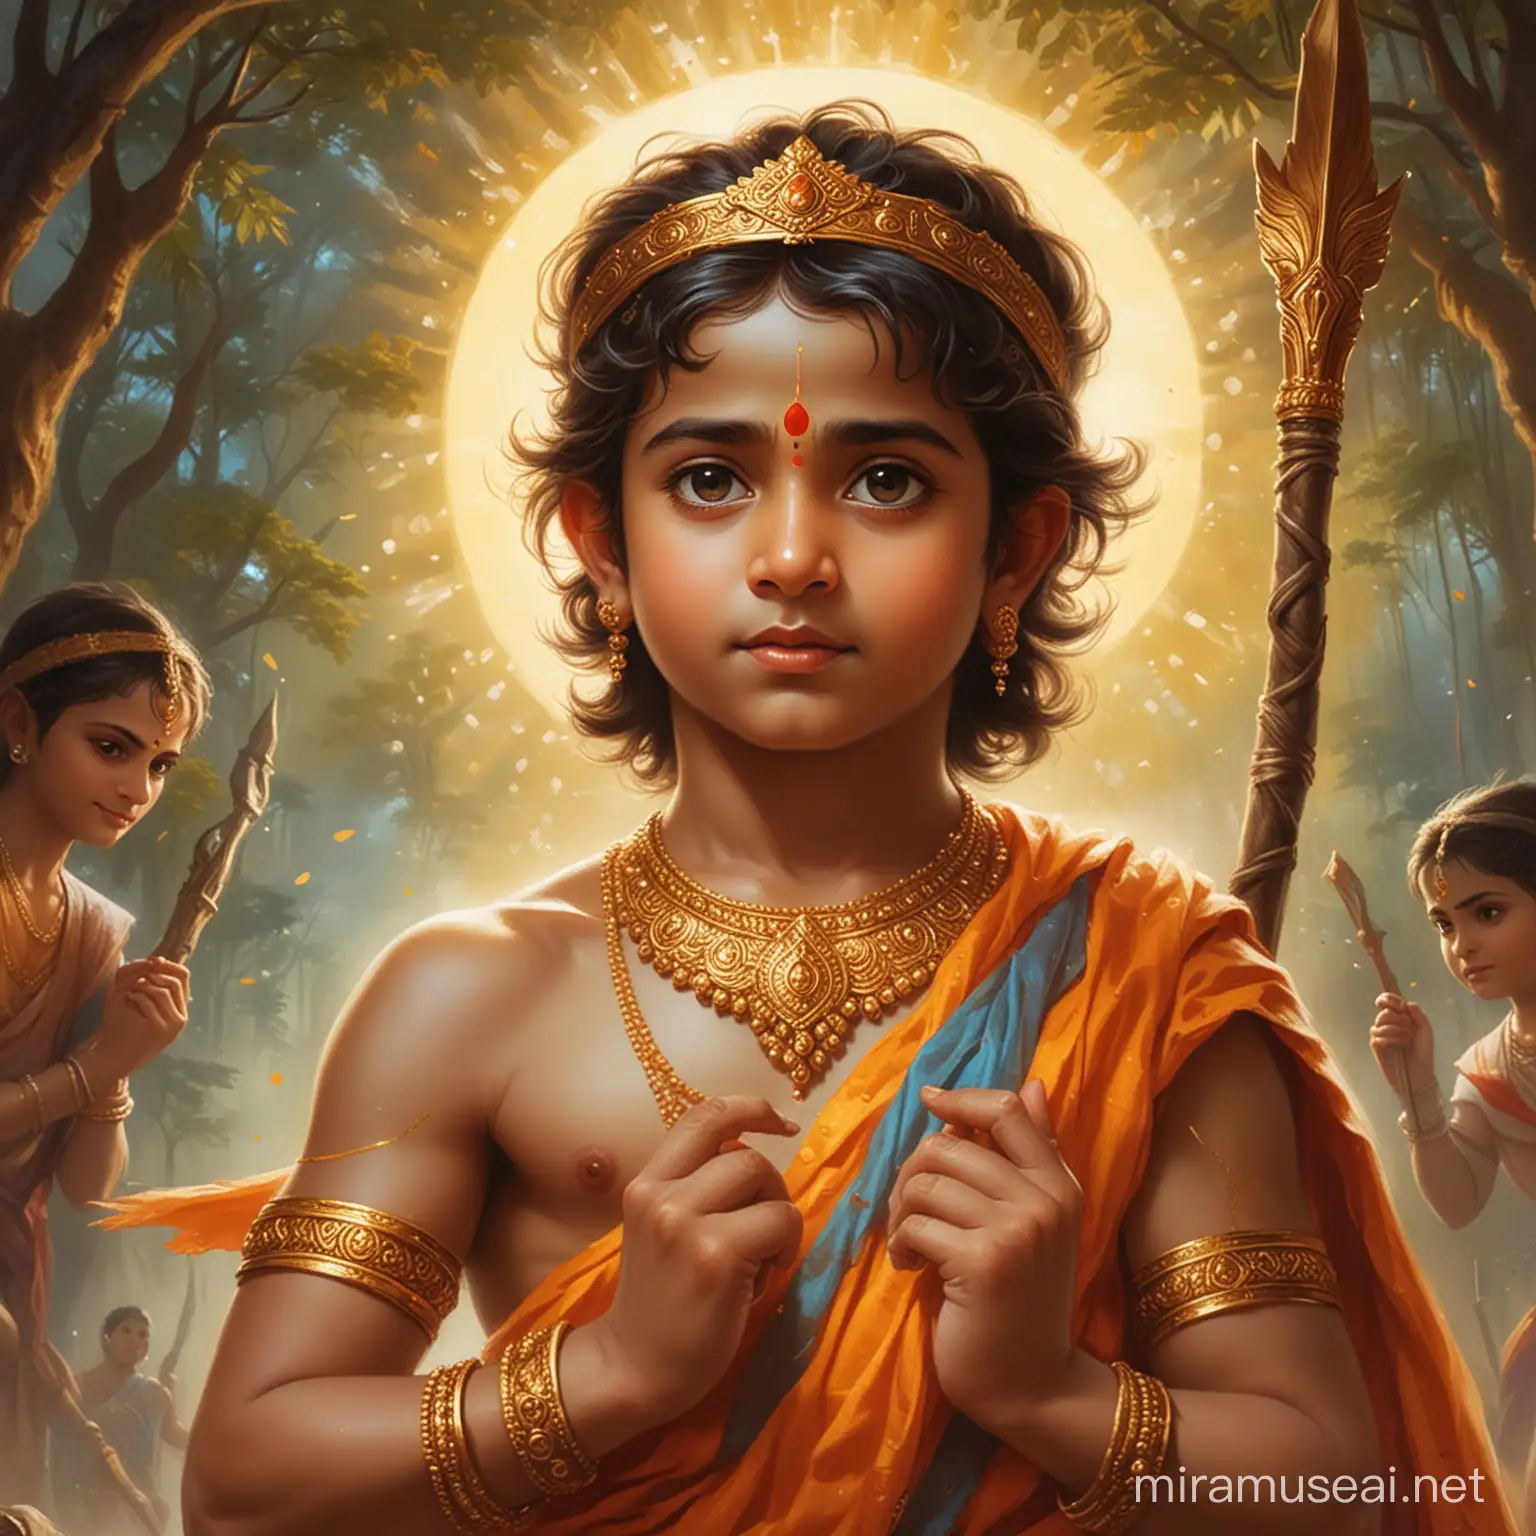 Divine Wisdom and Innocence Lord Ramas Virtue in a Childs Guise